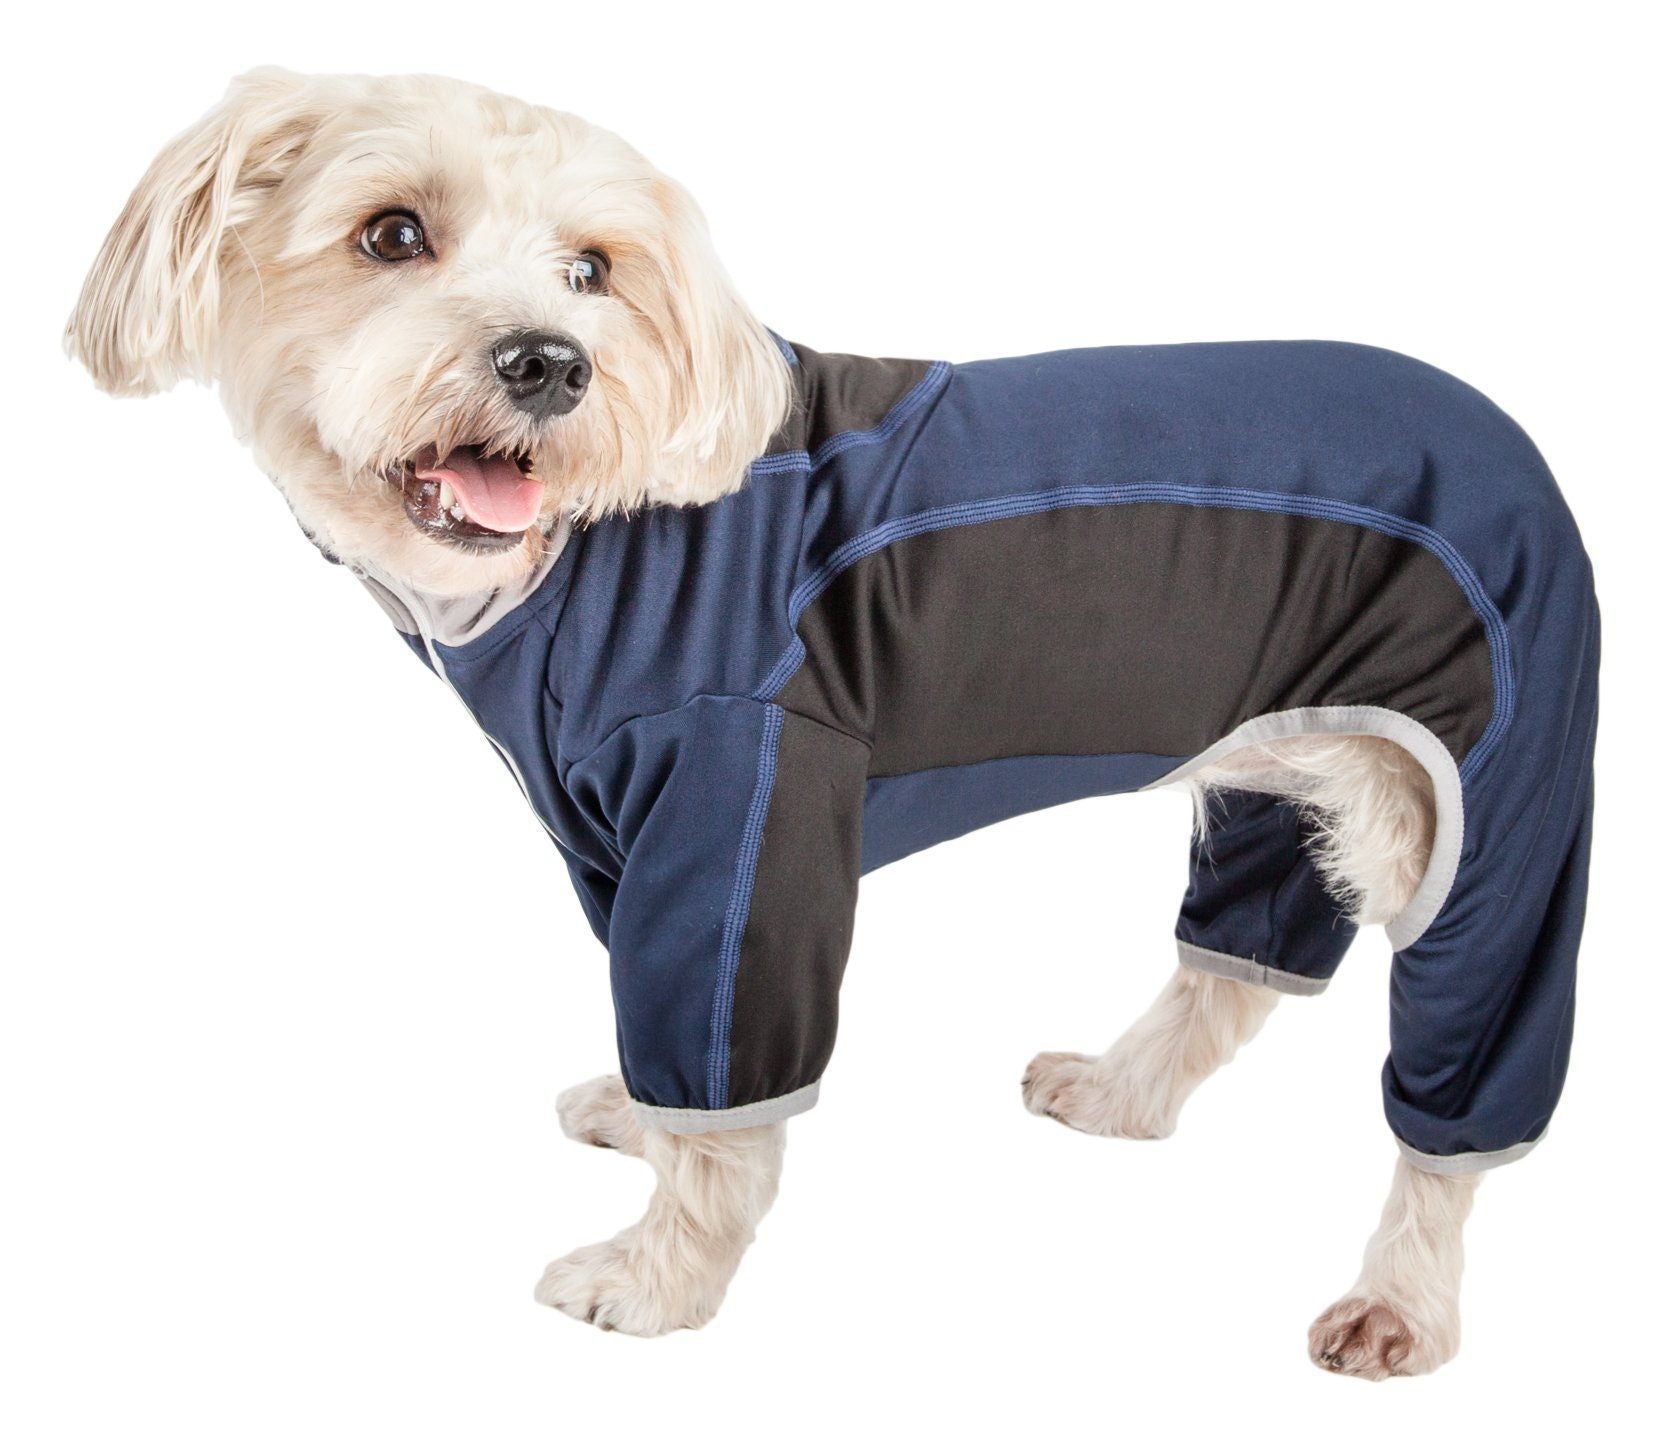 Pet Life ® Active 'Warm-Pup' Stretchy and Quick-Drying Fitness Dog Yoga Warm-Up Tracksuit X-Small Navy and Black